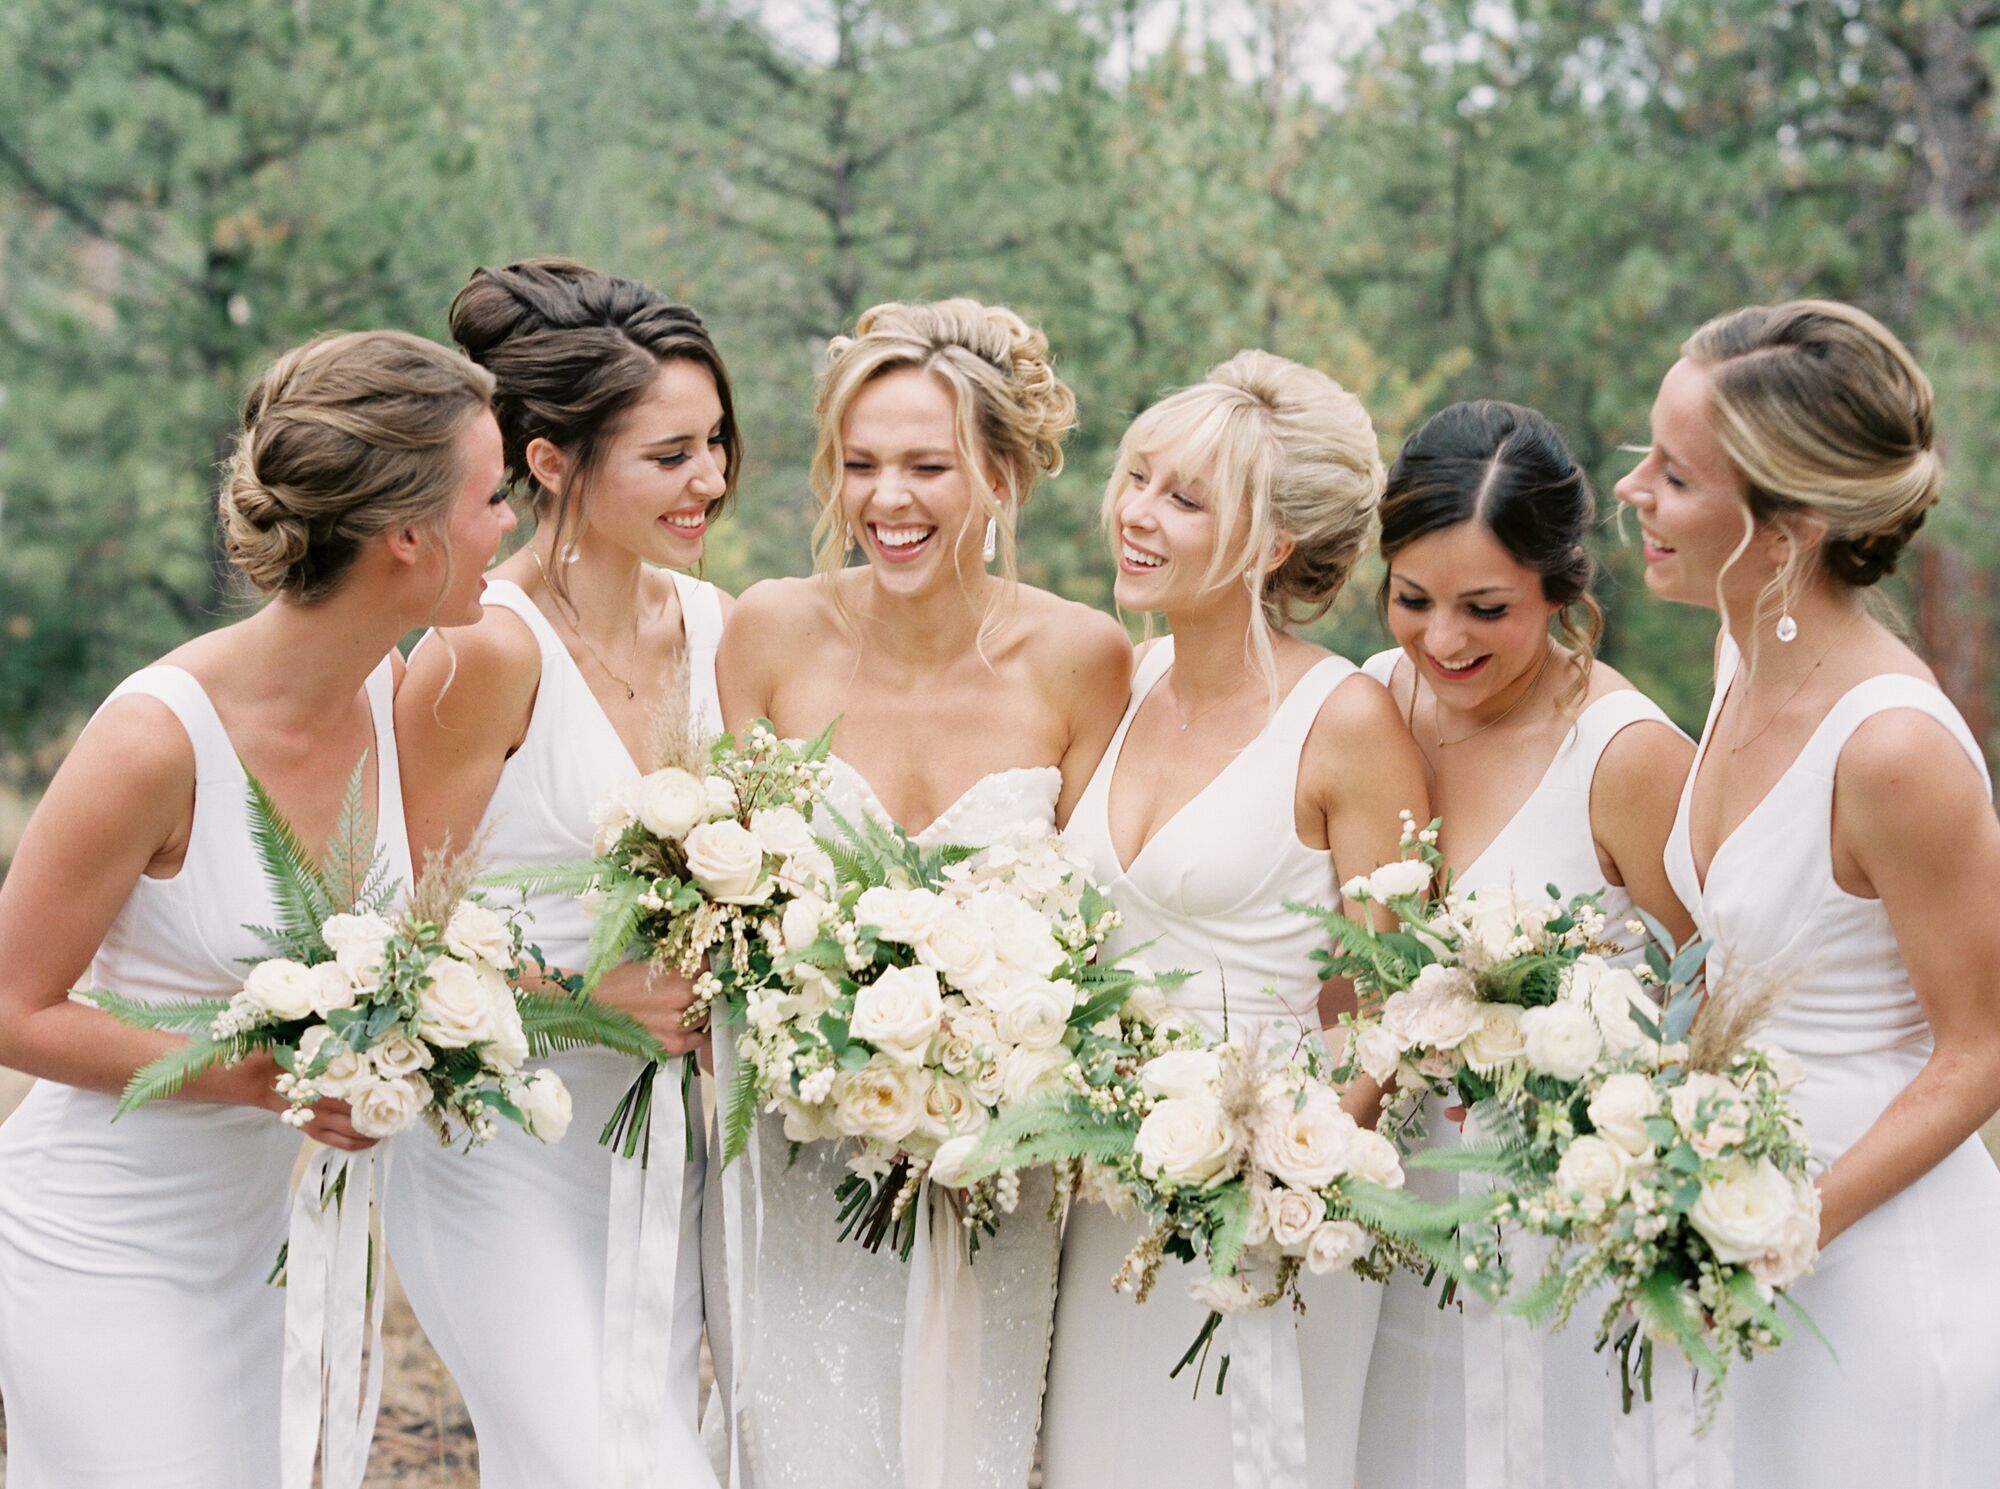 Sophisticated Yet Sexy Bridesmaid Dresses.